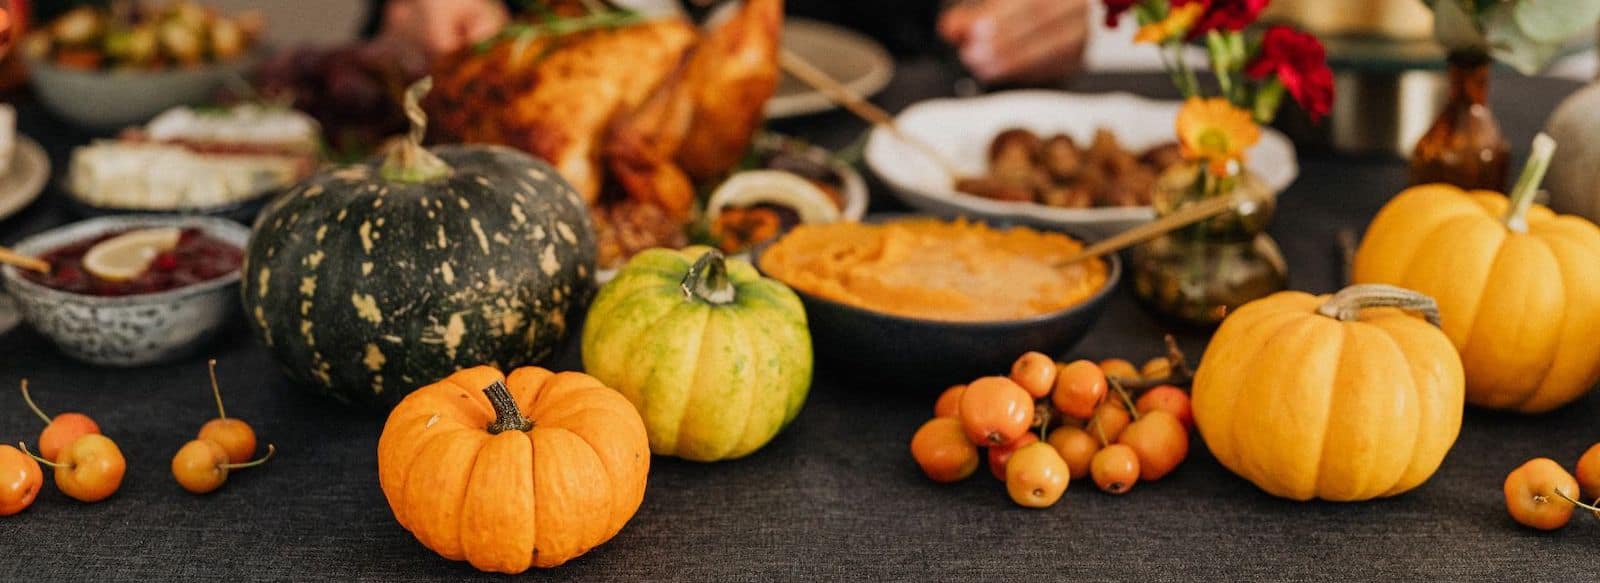 a gluten-free thanksgiving table with pumpkins, cranberry sauce, sweet potatoes, turkey, and indistinguishable, blurred dishes